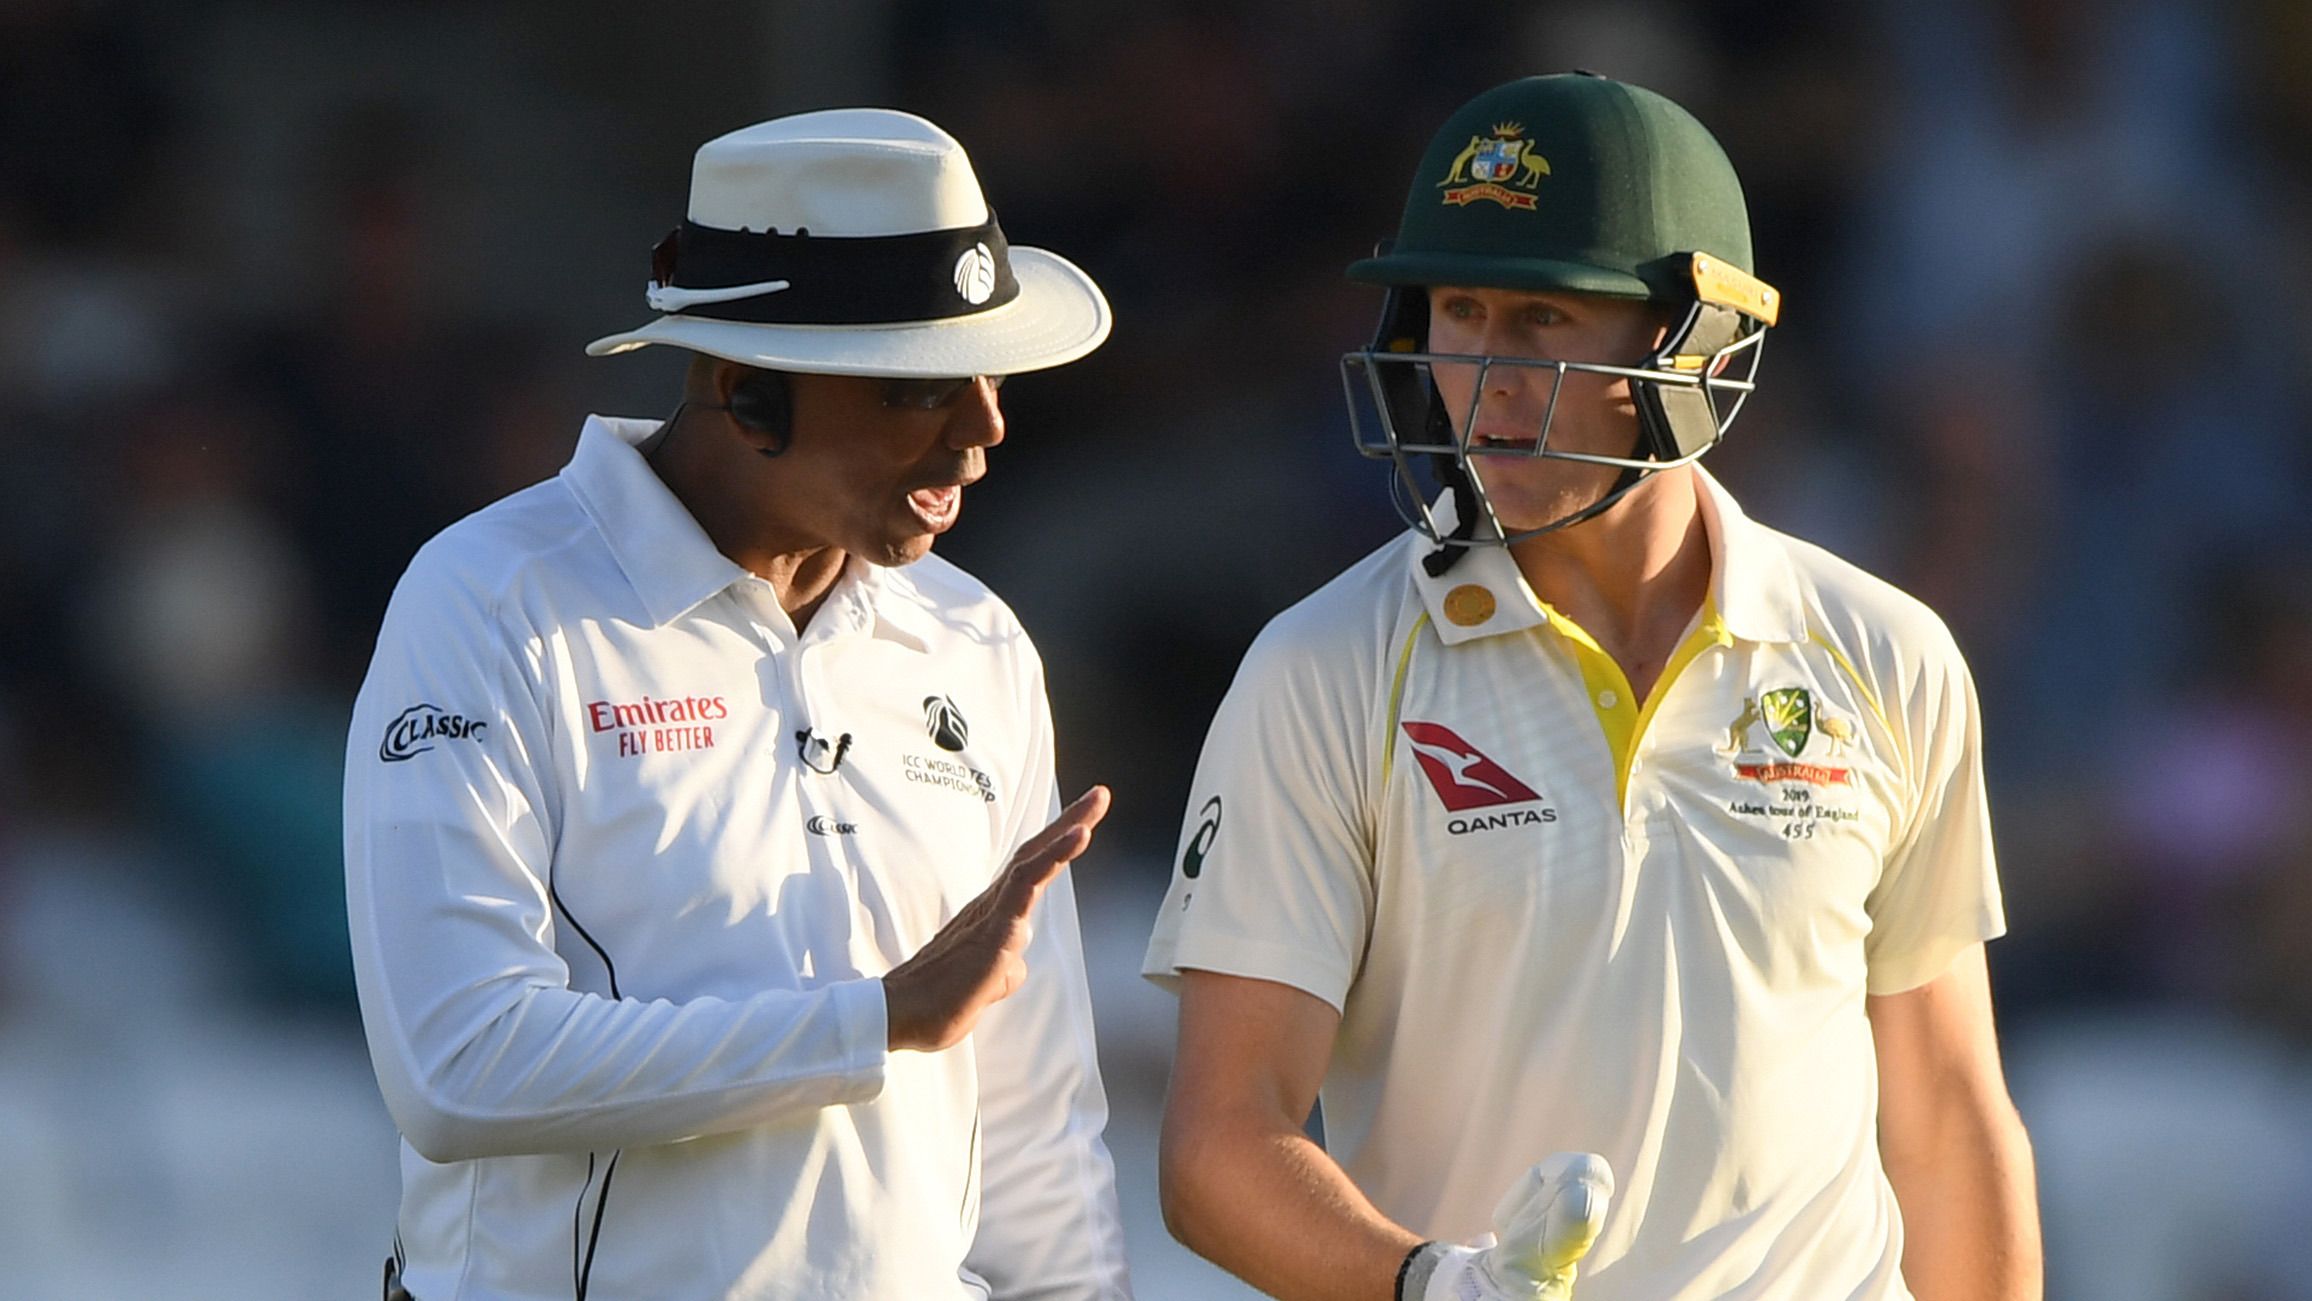 Australia batsman Marnus Labuschagne has words with umpire Joel Wilson during day two of the 3rd Test Match between England and Australia at Headingley on August 23, 2019 in Leeds, England. (Photo by Stu Forster/Getty Images)